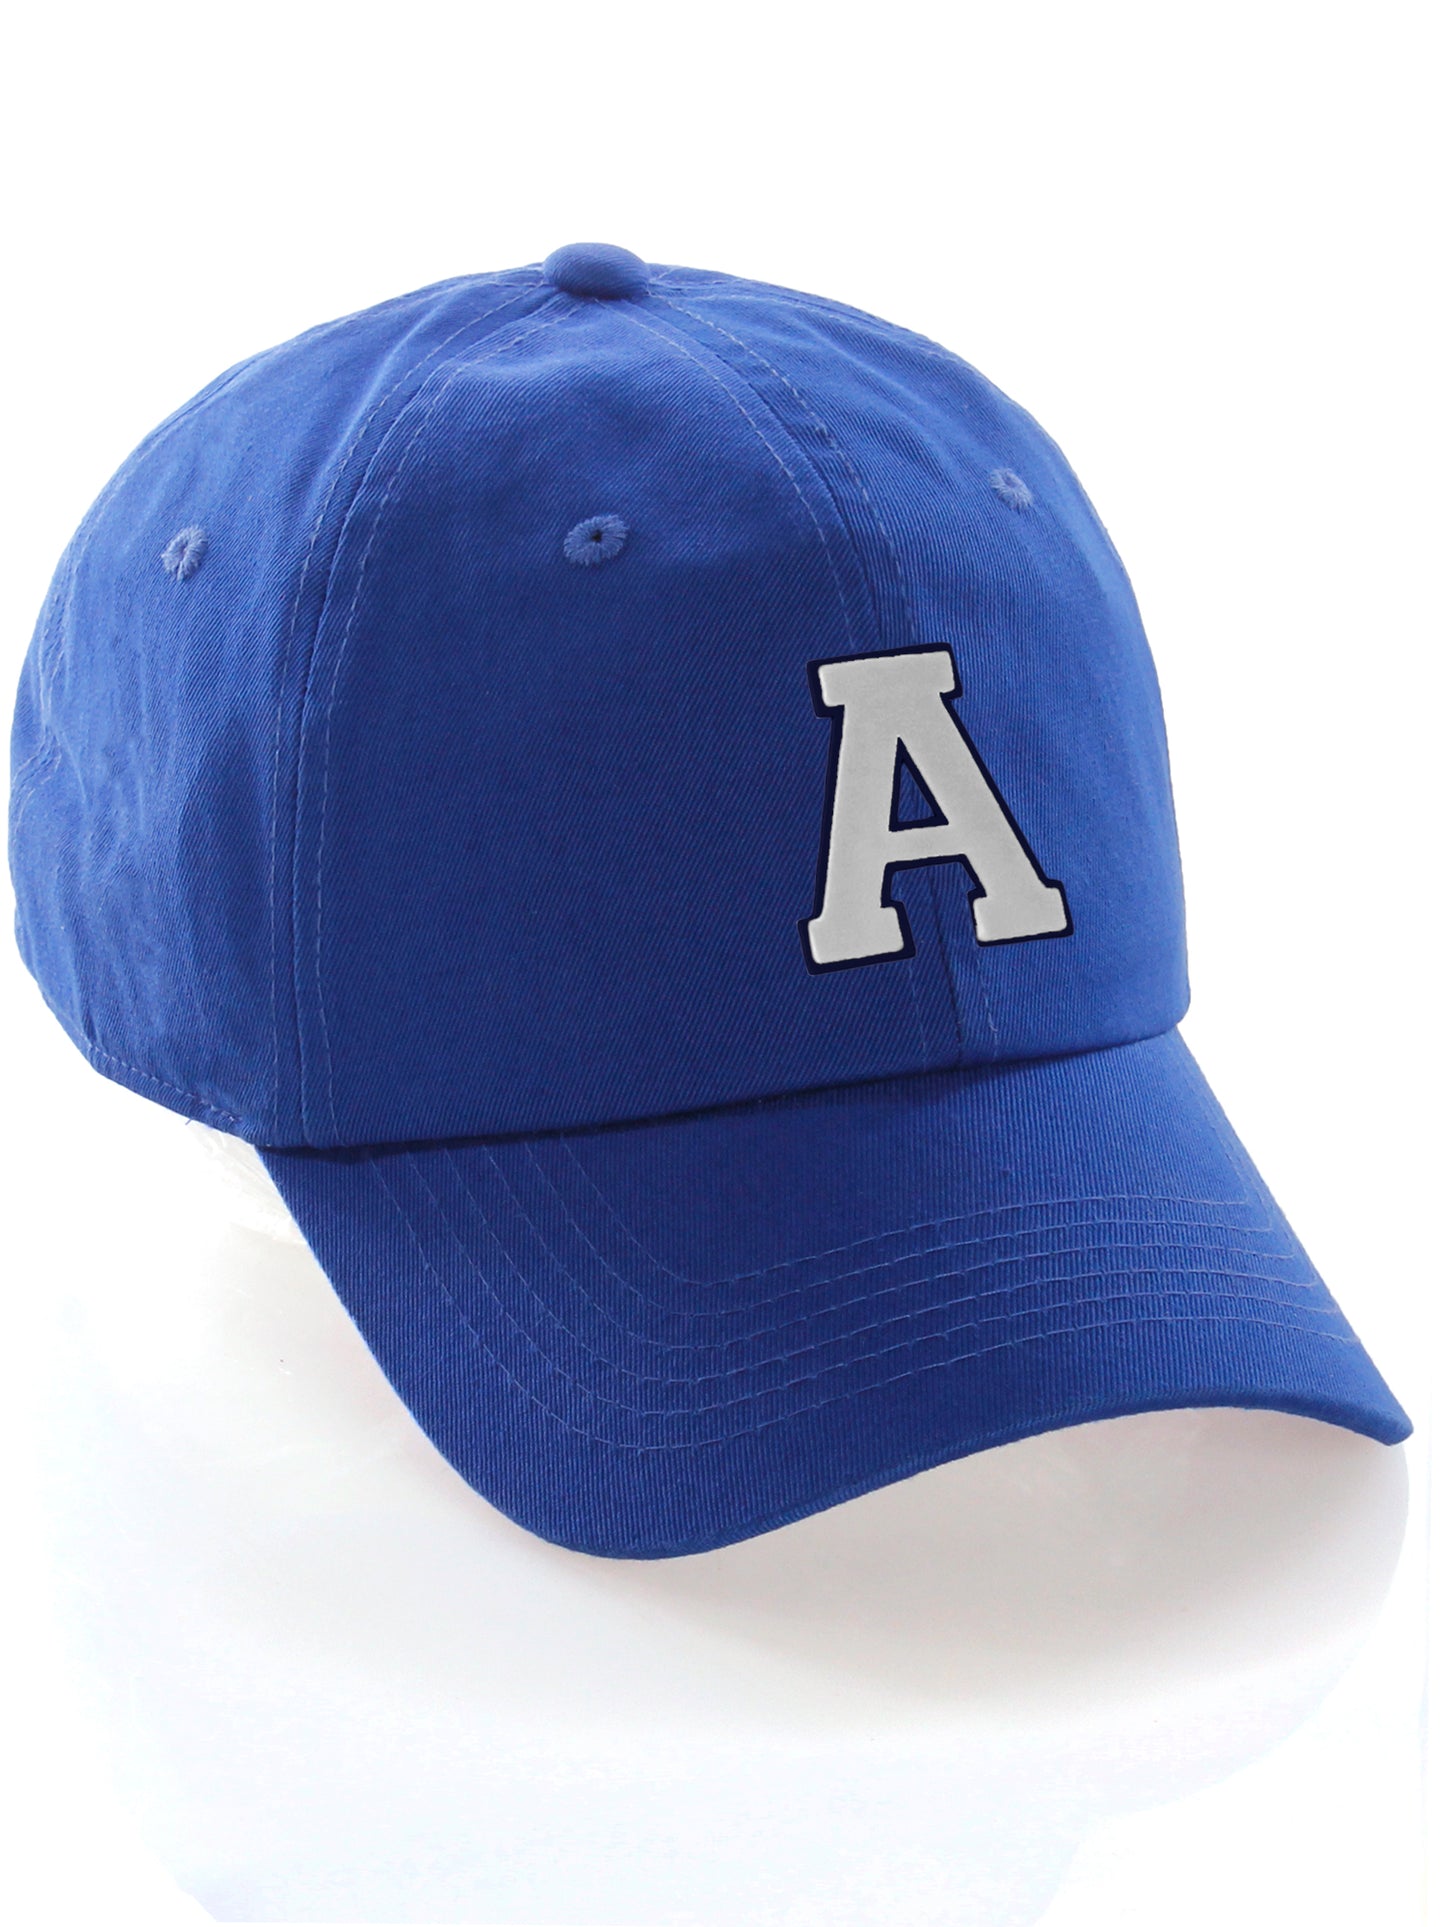 I&W Hatgear Customized Letter Initial Baseball Hat A to Z Team Colors, Blue Cap Navy White